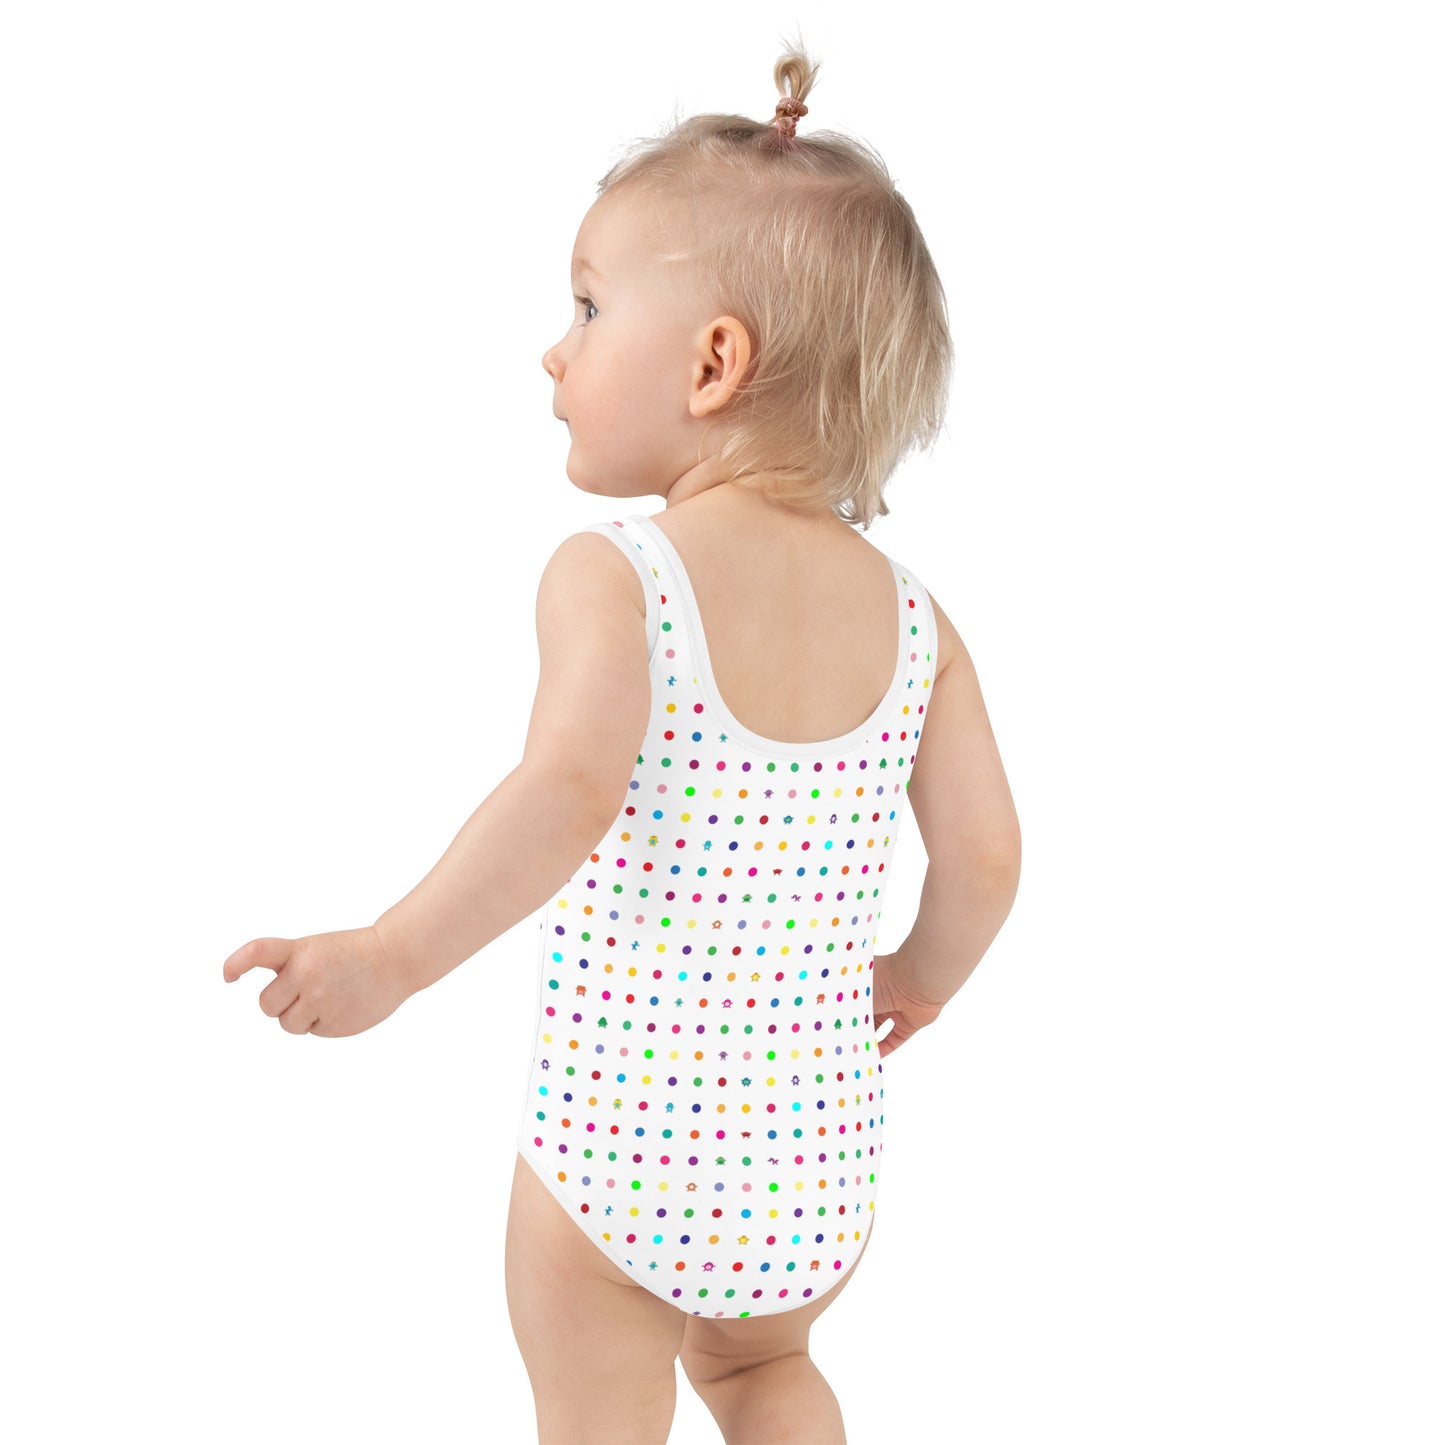 white girls swim suit with small dots and coloured monsters toddler rear view